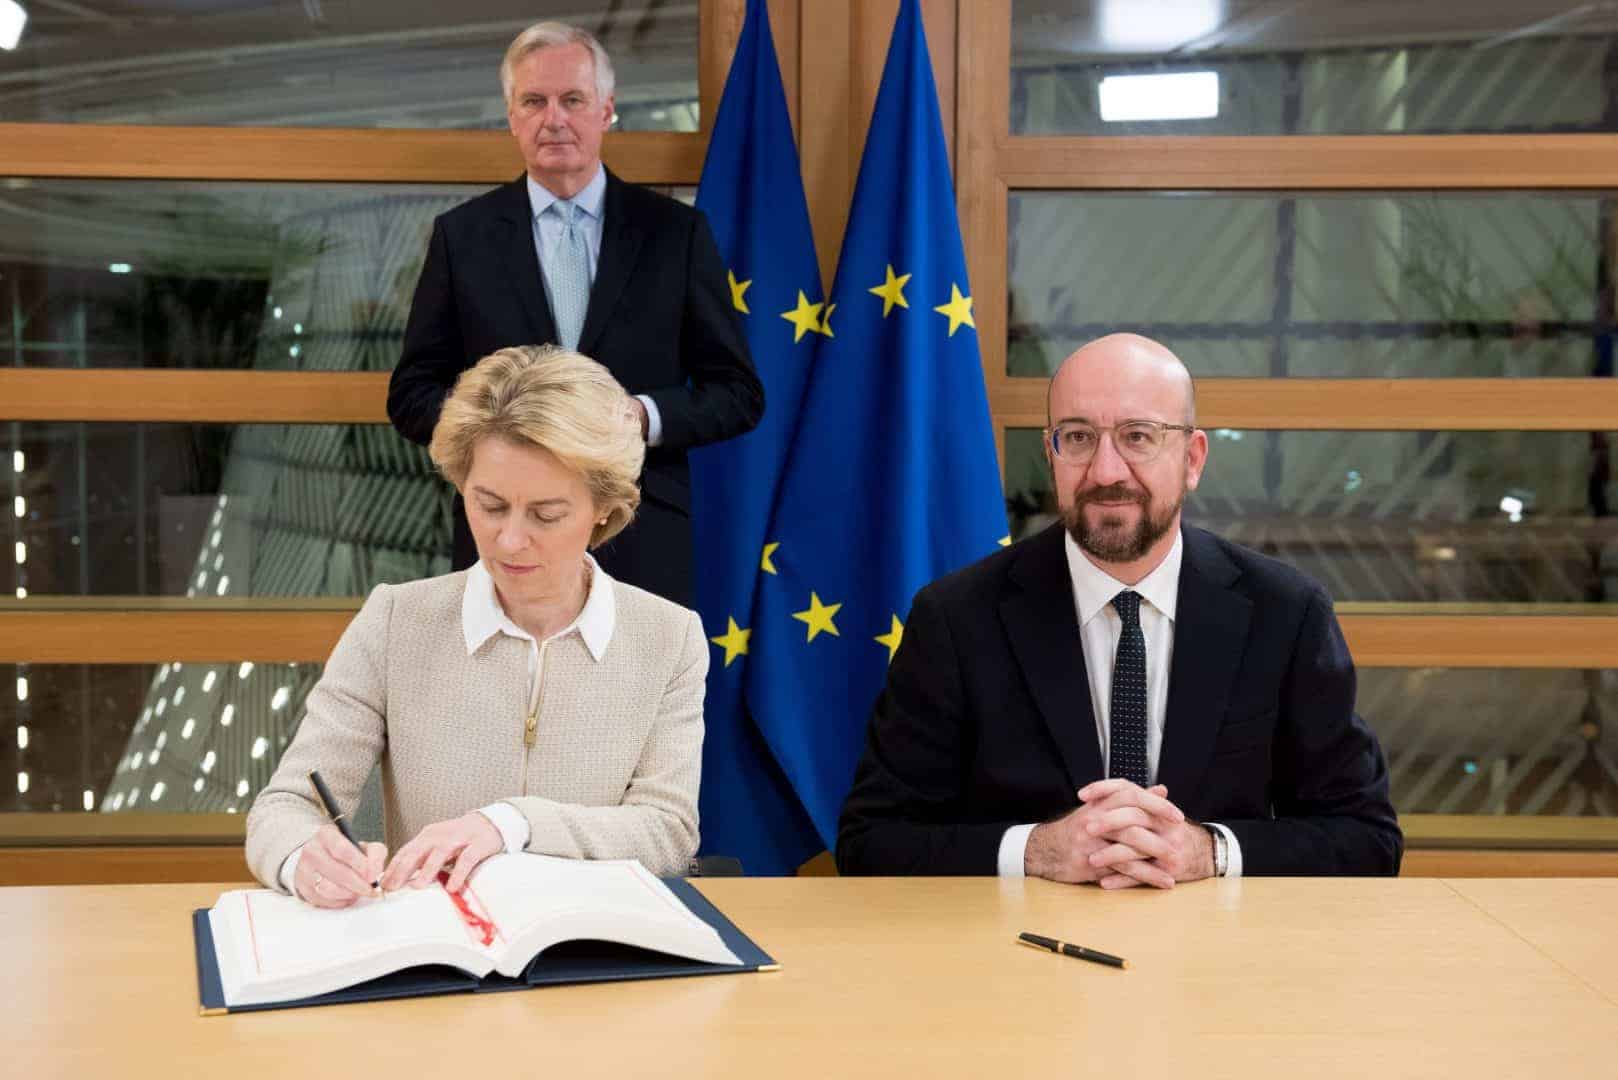 European presidents sign off on Brexit agreement